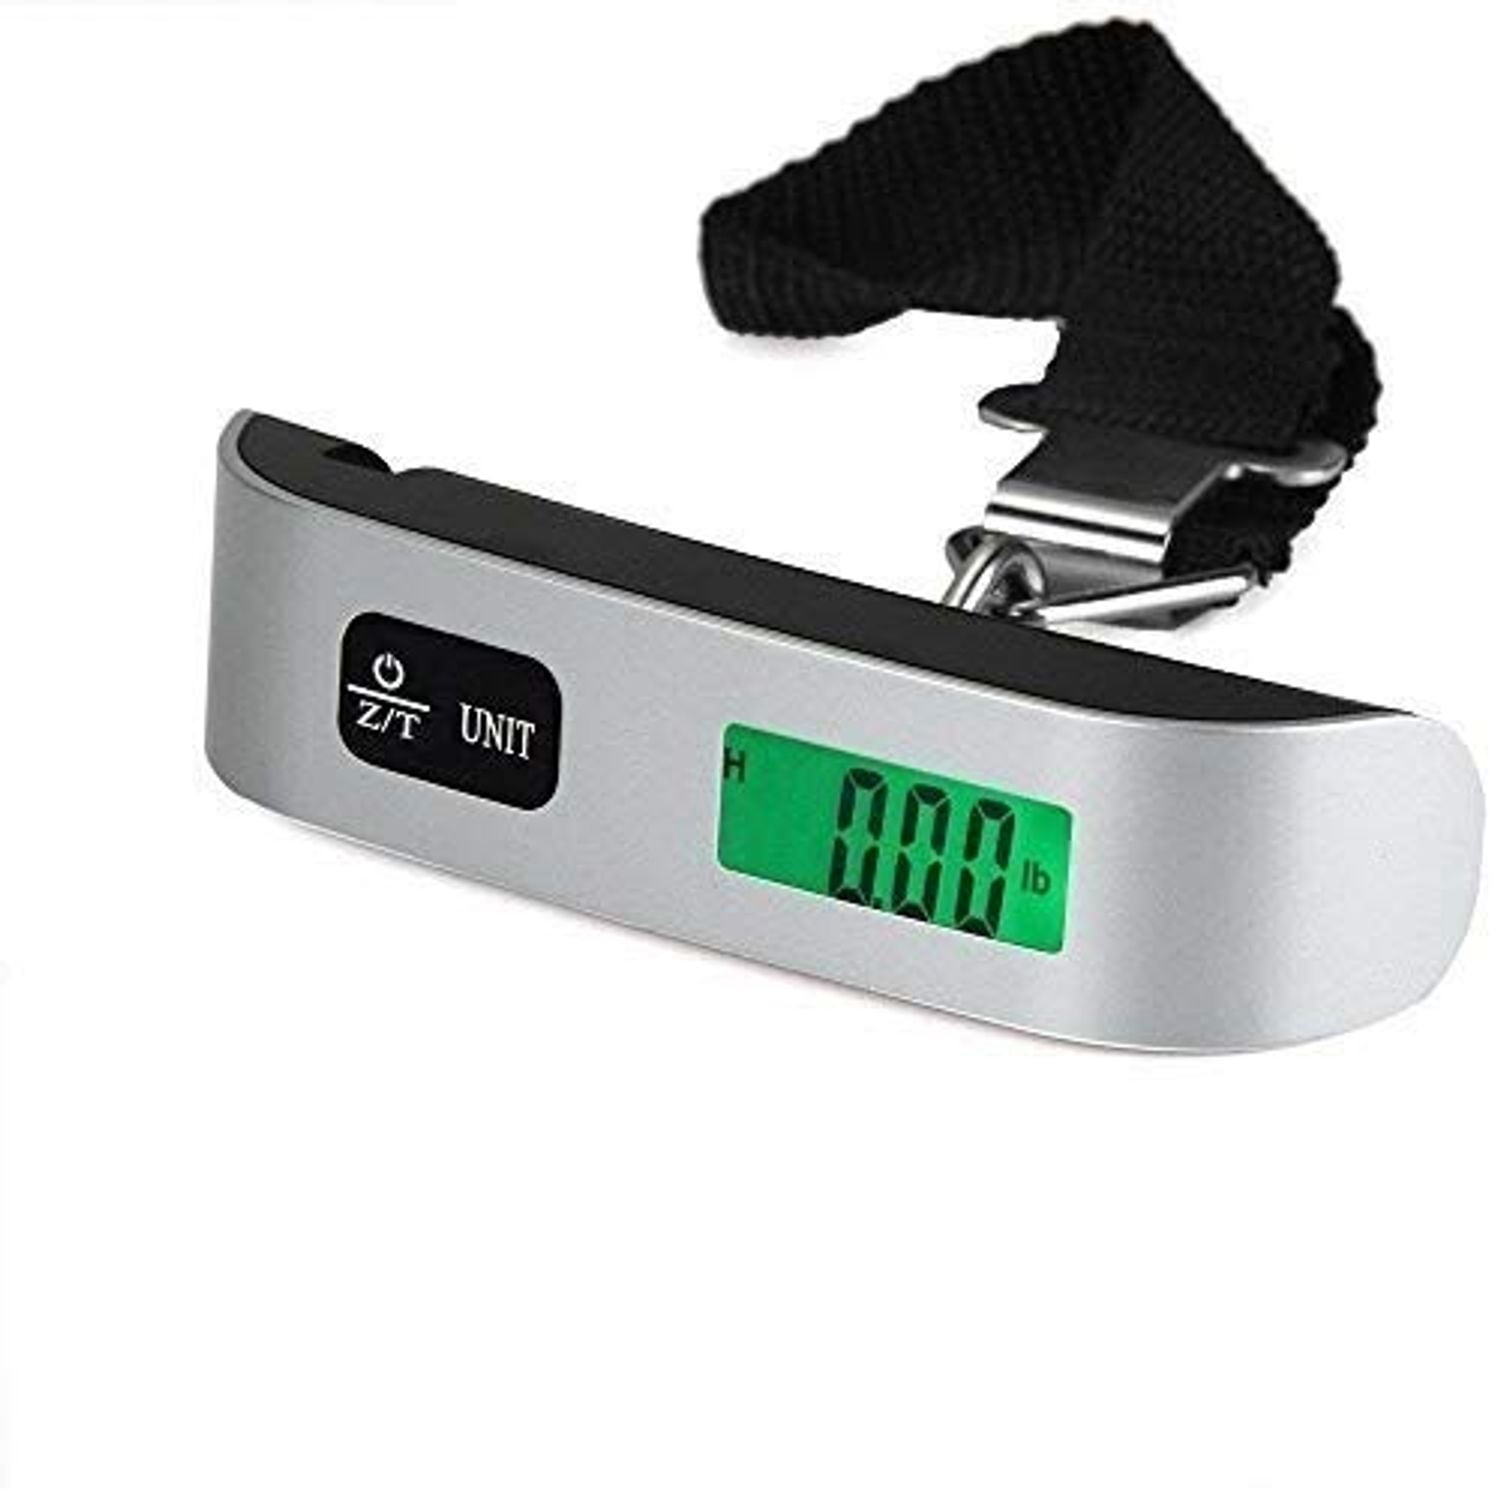 Shopping 110LB / 50KG Digital Hanging Baggage Scale Auto-lock Display Handheld Weighing Machine with Backlit for Travel Portable LCD Electronic Luggage Scales